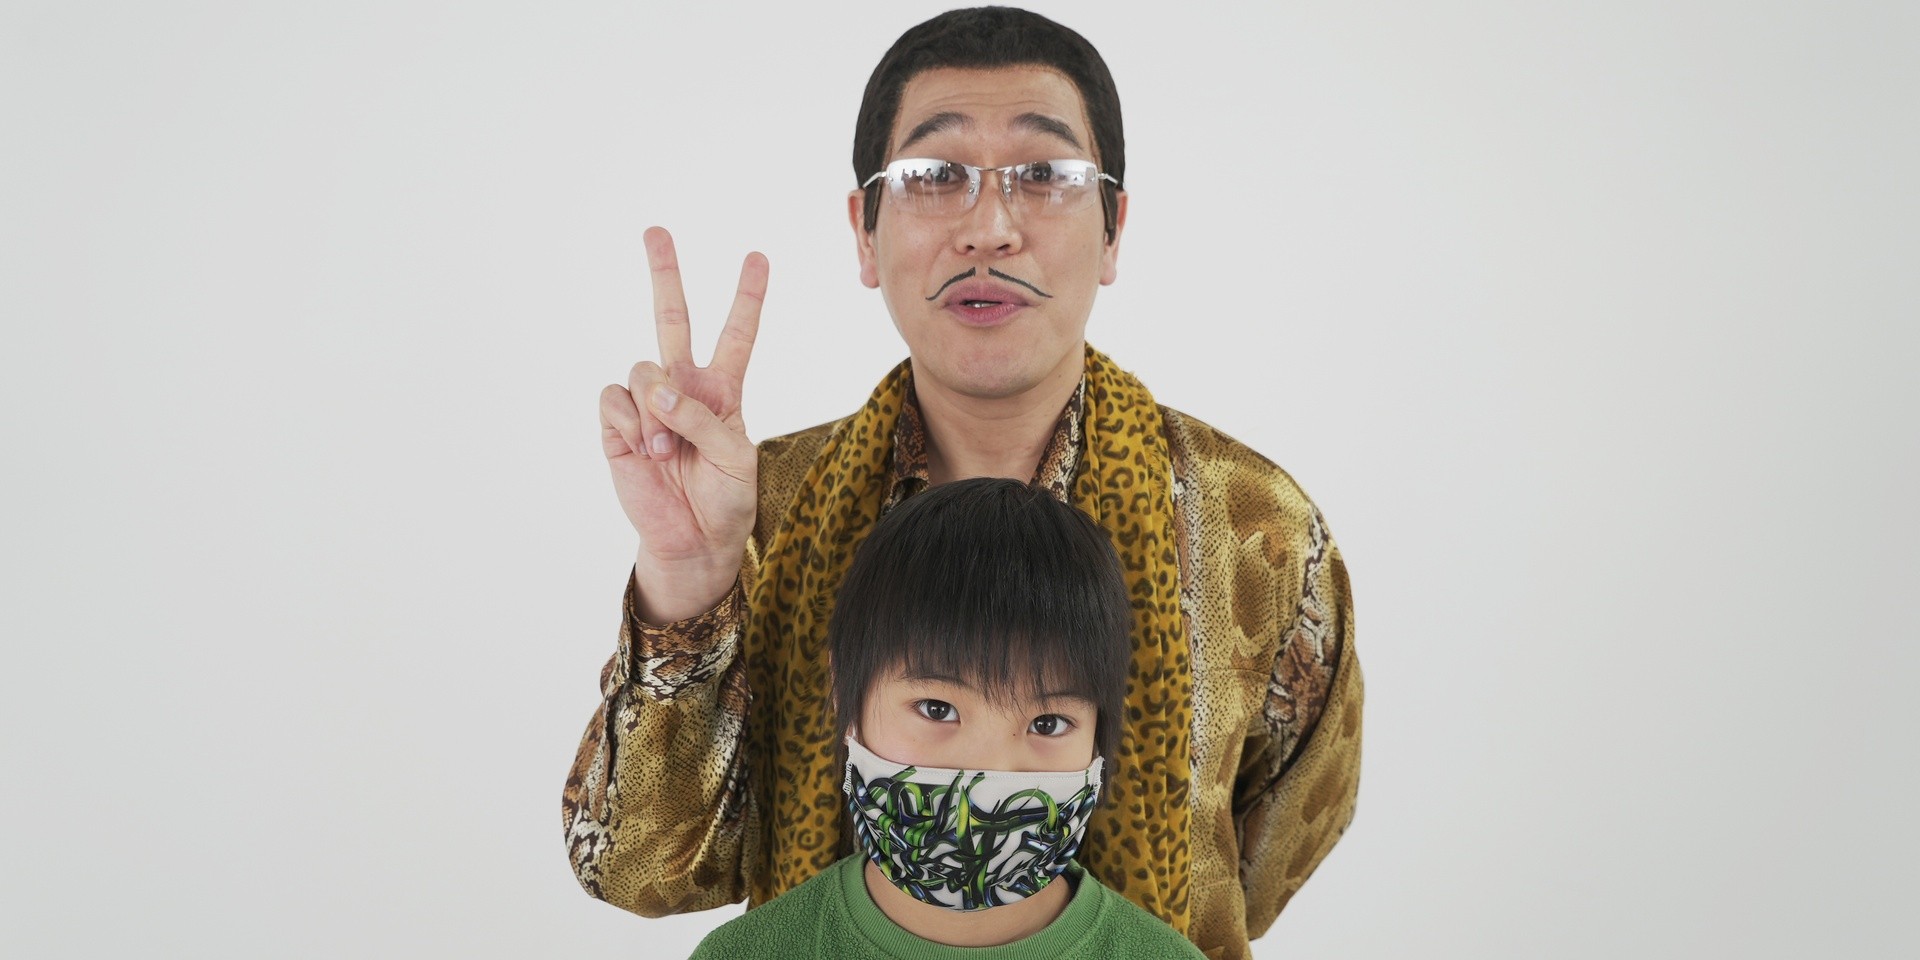 PIKOTARO and Zombie Zoo Keeper join forces for new NFT music video 'Zombie Zoo to PIKOTARO DESU'